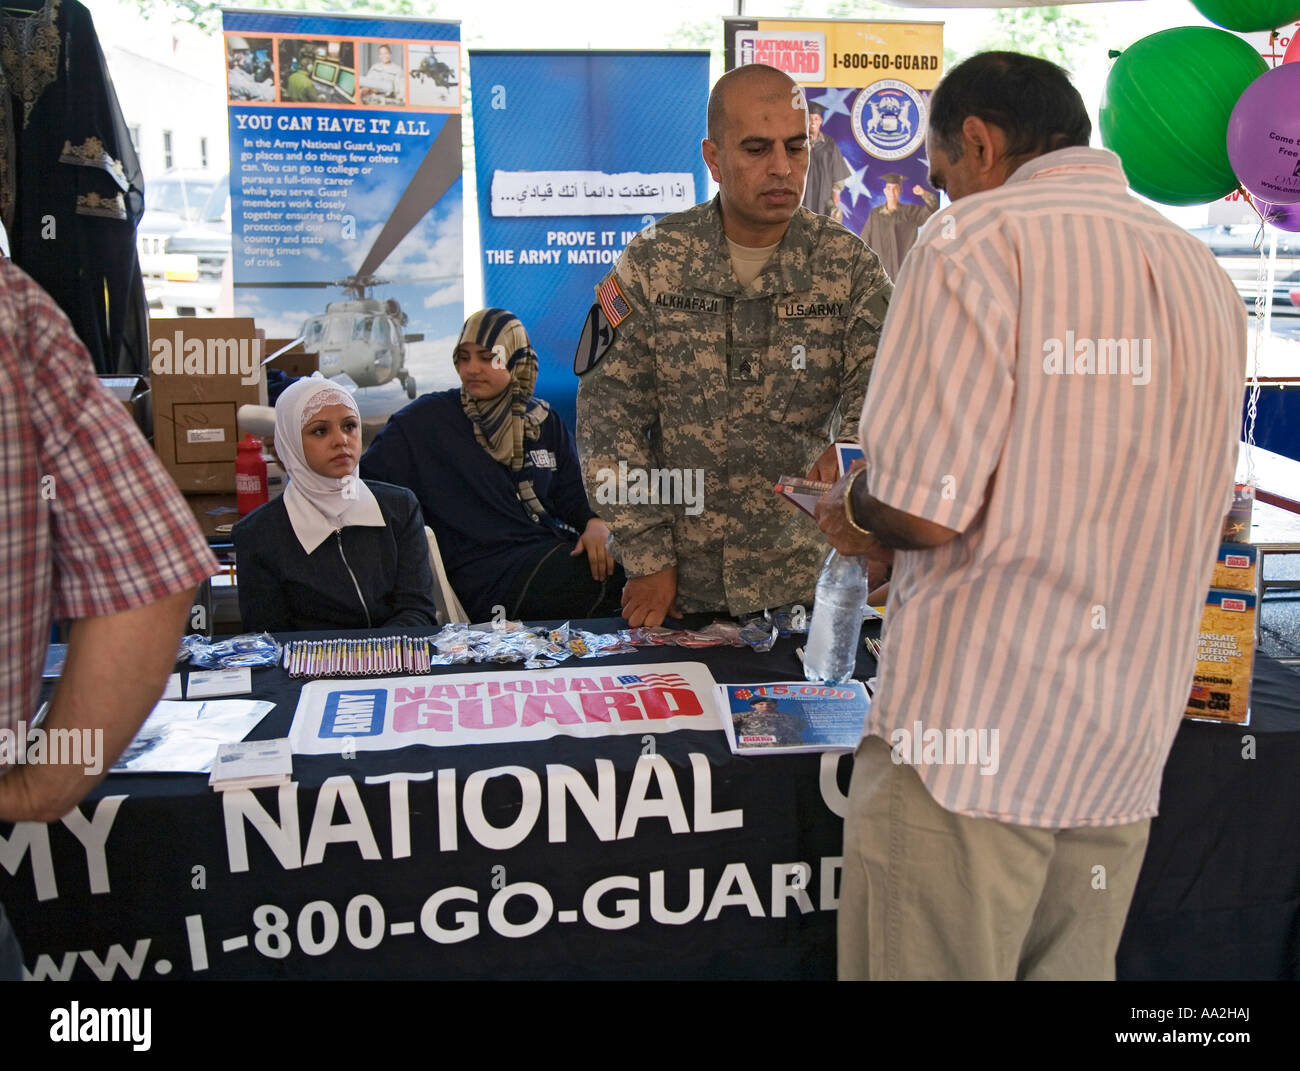 Dearborn Michigan A recruiting booth for the Army National Guard at the Arab International Festival Stock Photo